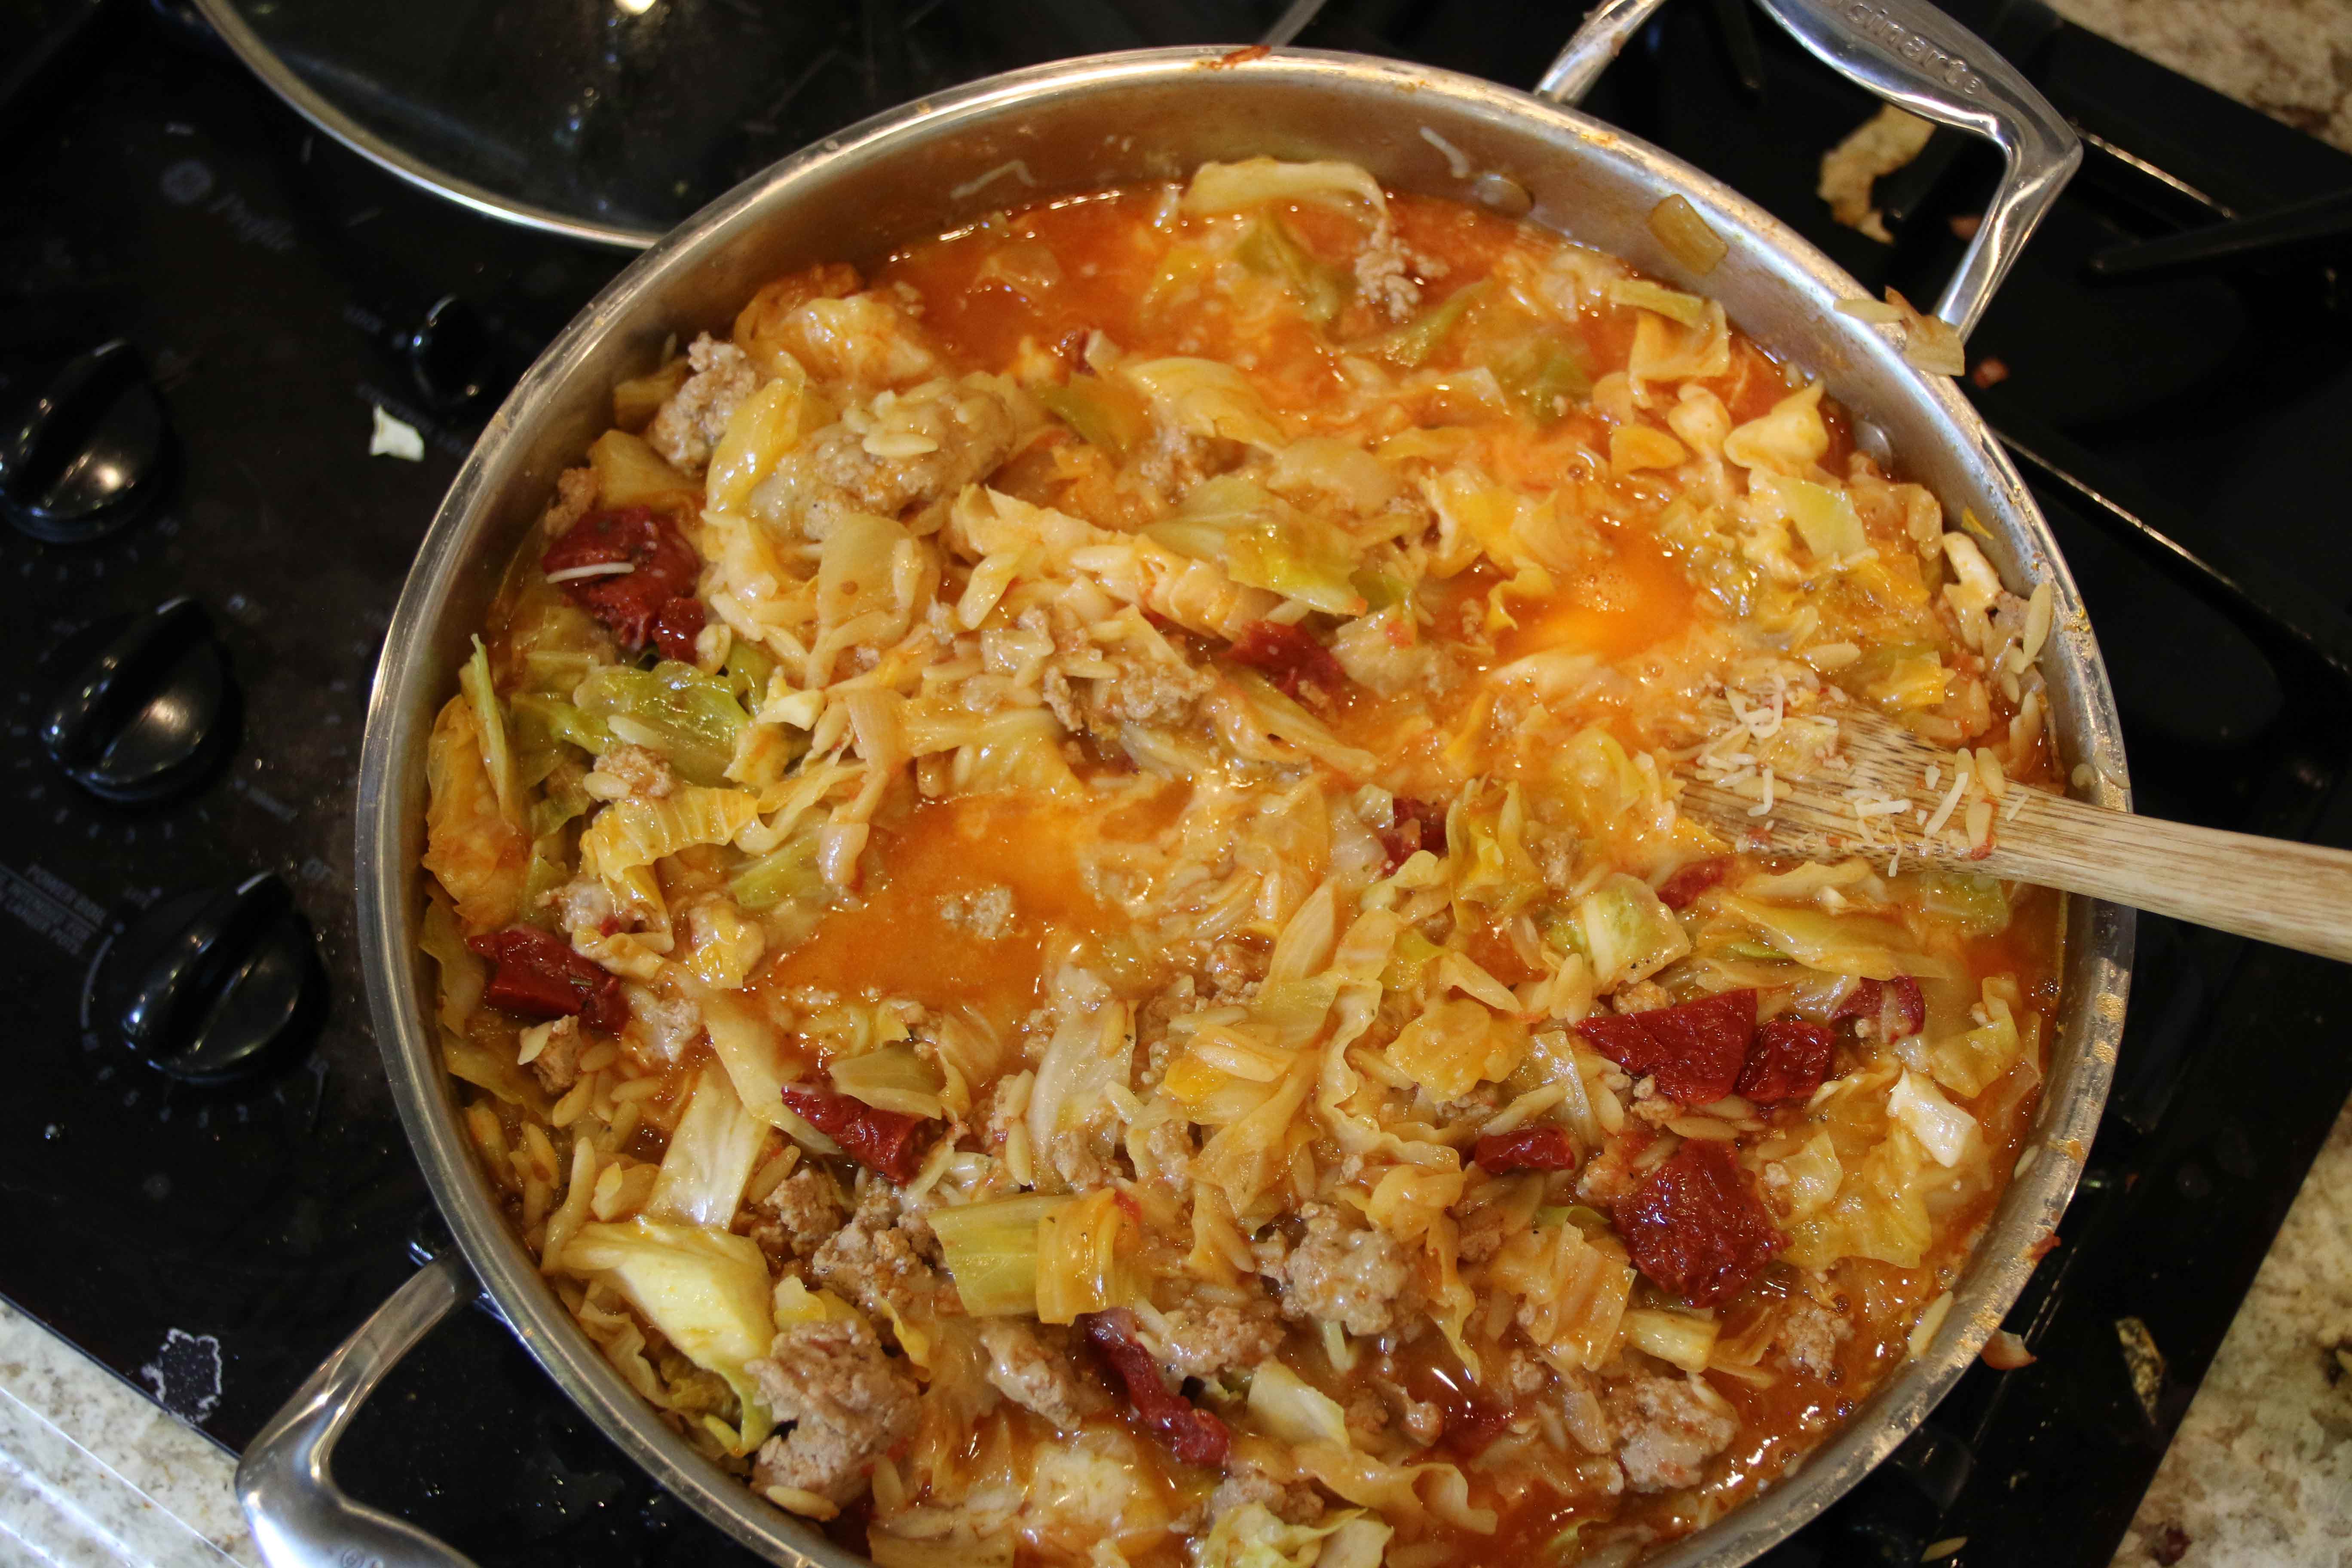 What an incredibly easy one-pot dish to serve! You'll friend and family will be so impressed. This Cabbage Turkey Casserole is absolutely delicious, easy to make and easy to clean up afterward. Looking for an easy to make casserole? #healthycasserole #turkeycasserole #cabbagecasserole